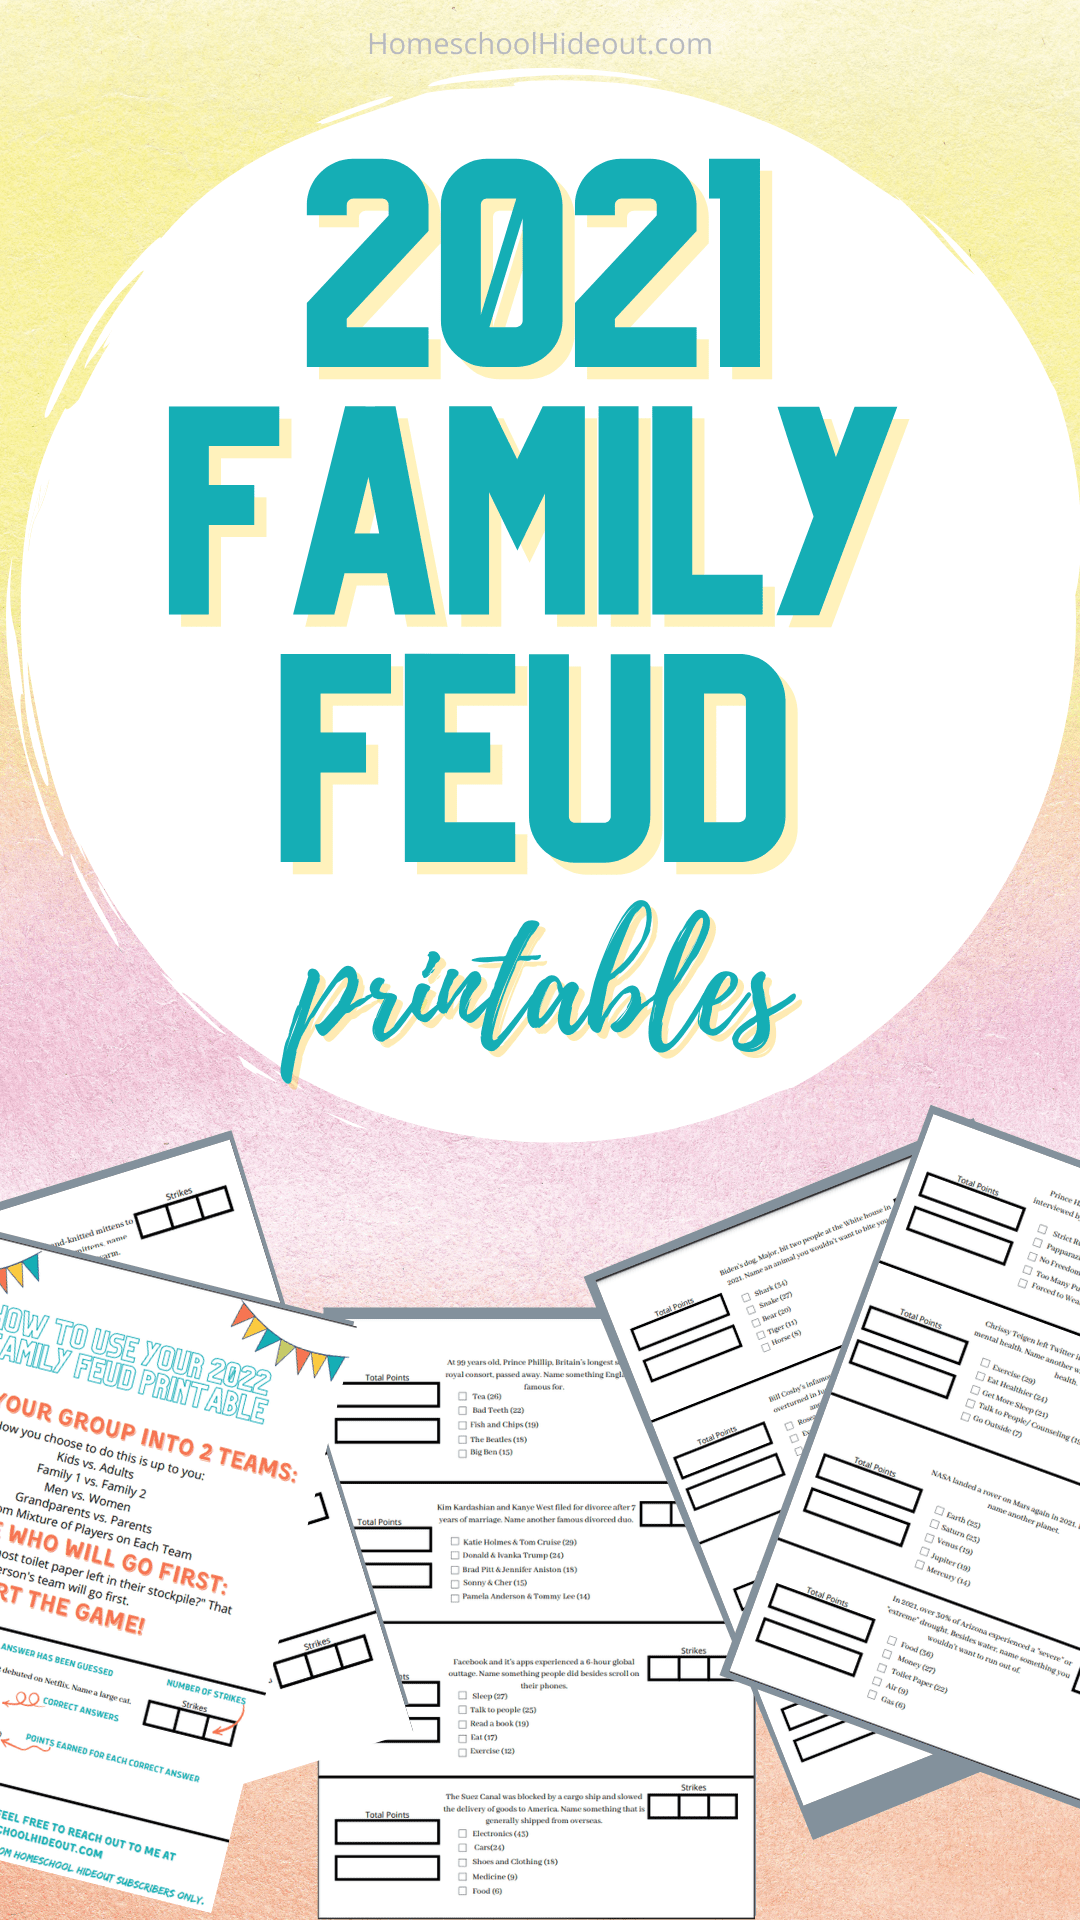 Father's Day Feud Printable Game Fun Family Activity for -  Portugal